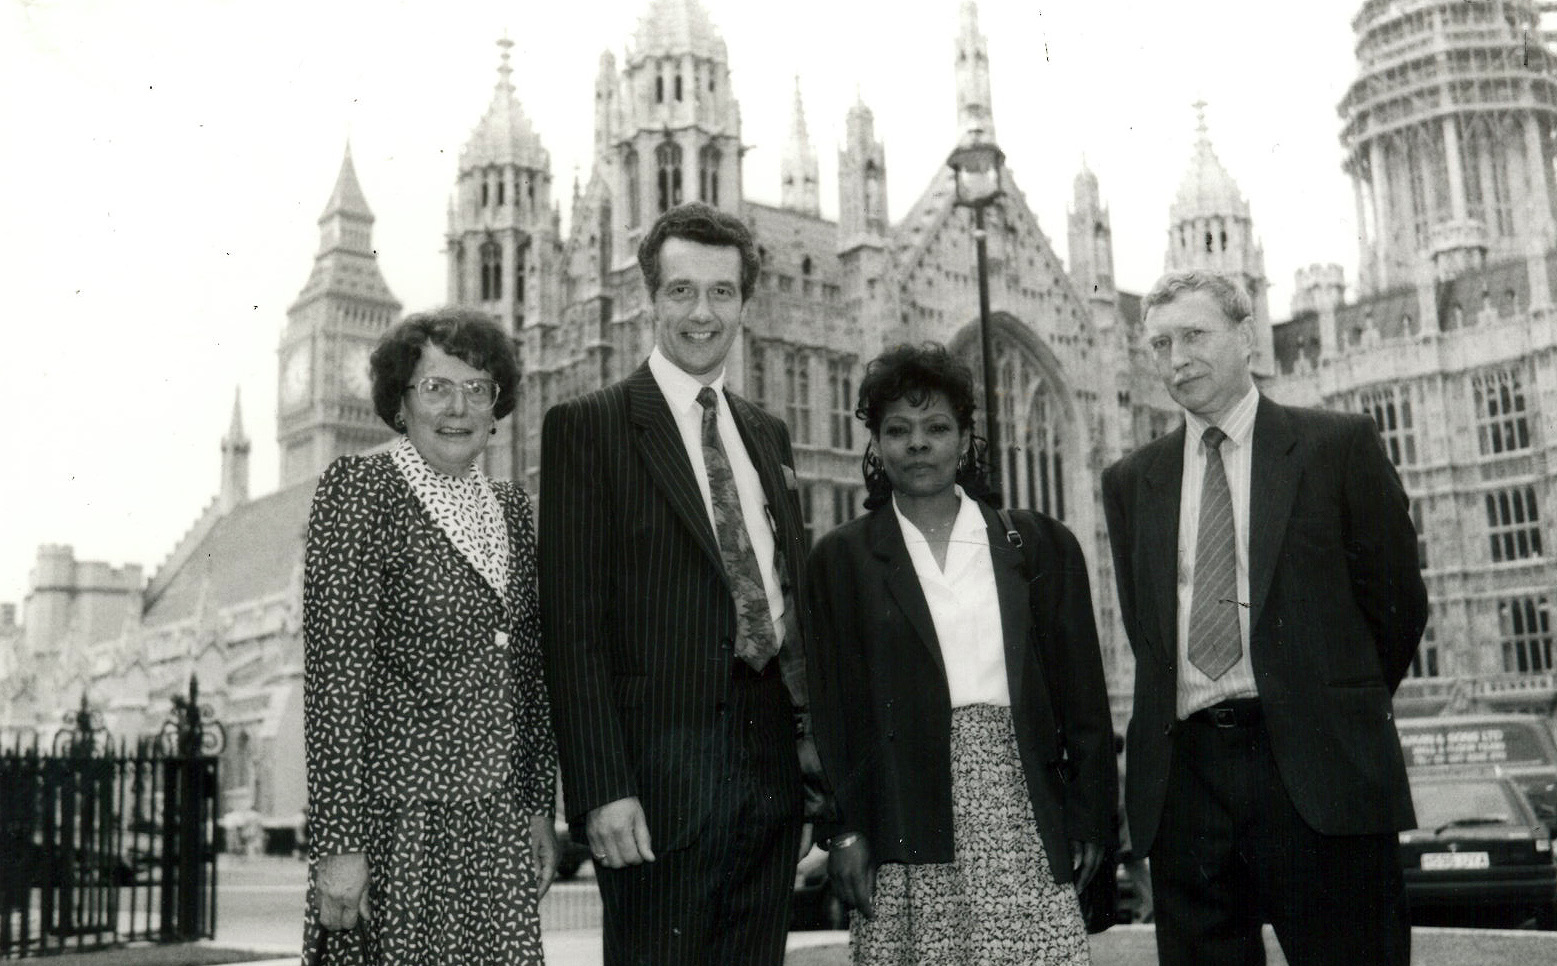 In 1992 I attended a meeting at the House of Commons to raise awareness of the need to encourage more Black parents to become school governors.